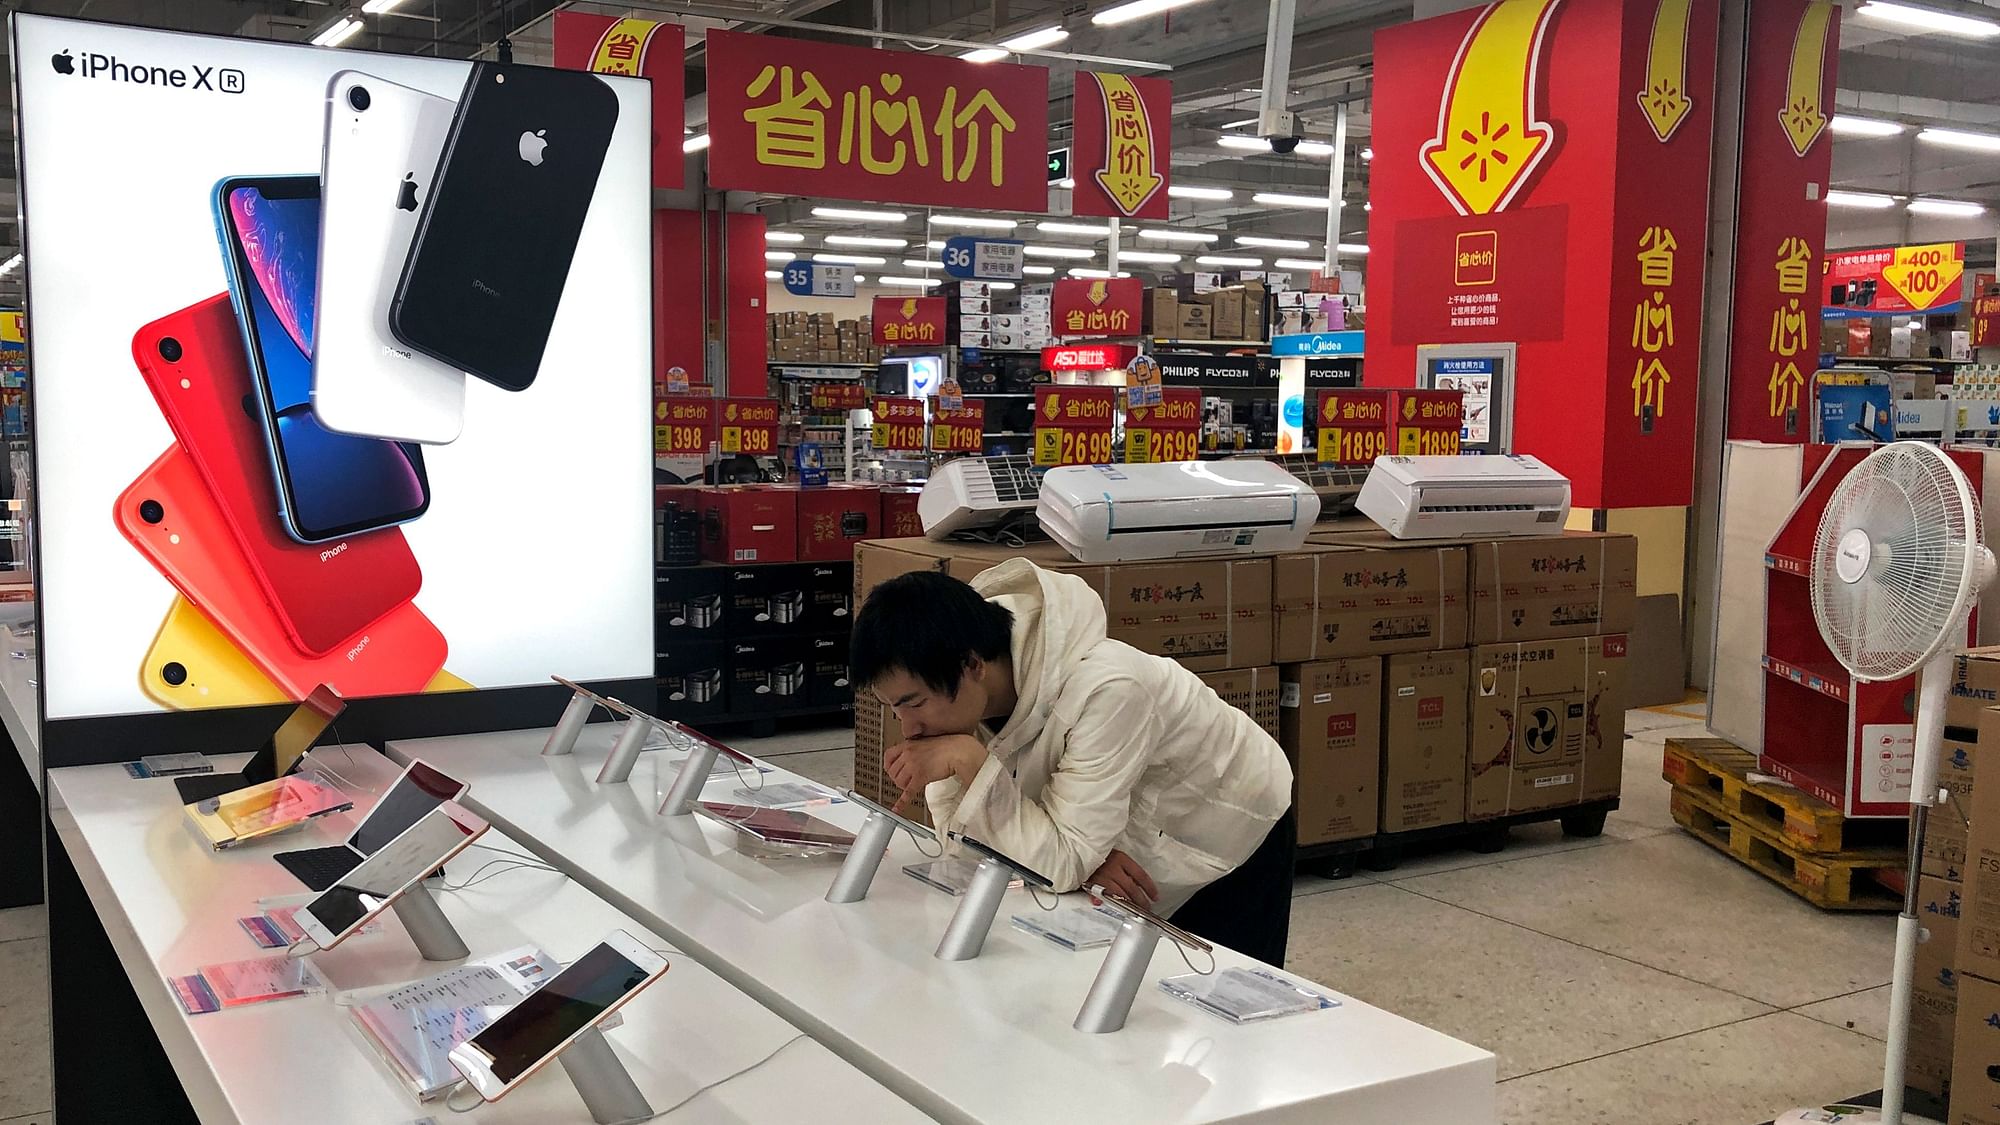 A man browses an iPhone unit on display at a section selling Apple’s products together with Chinese made electric appliances at a hypermarket in Beijing.